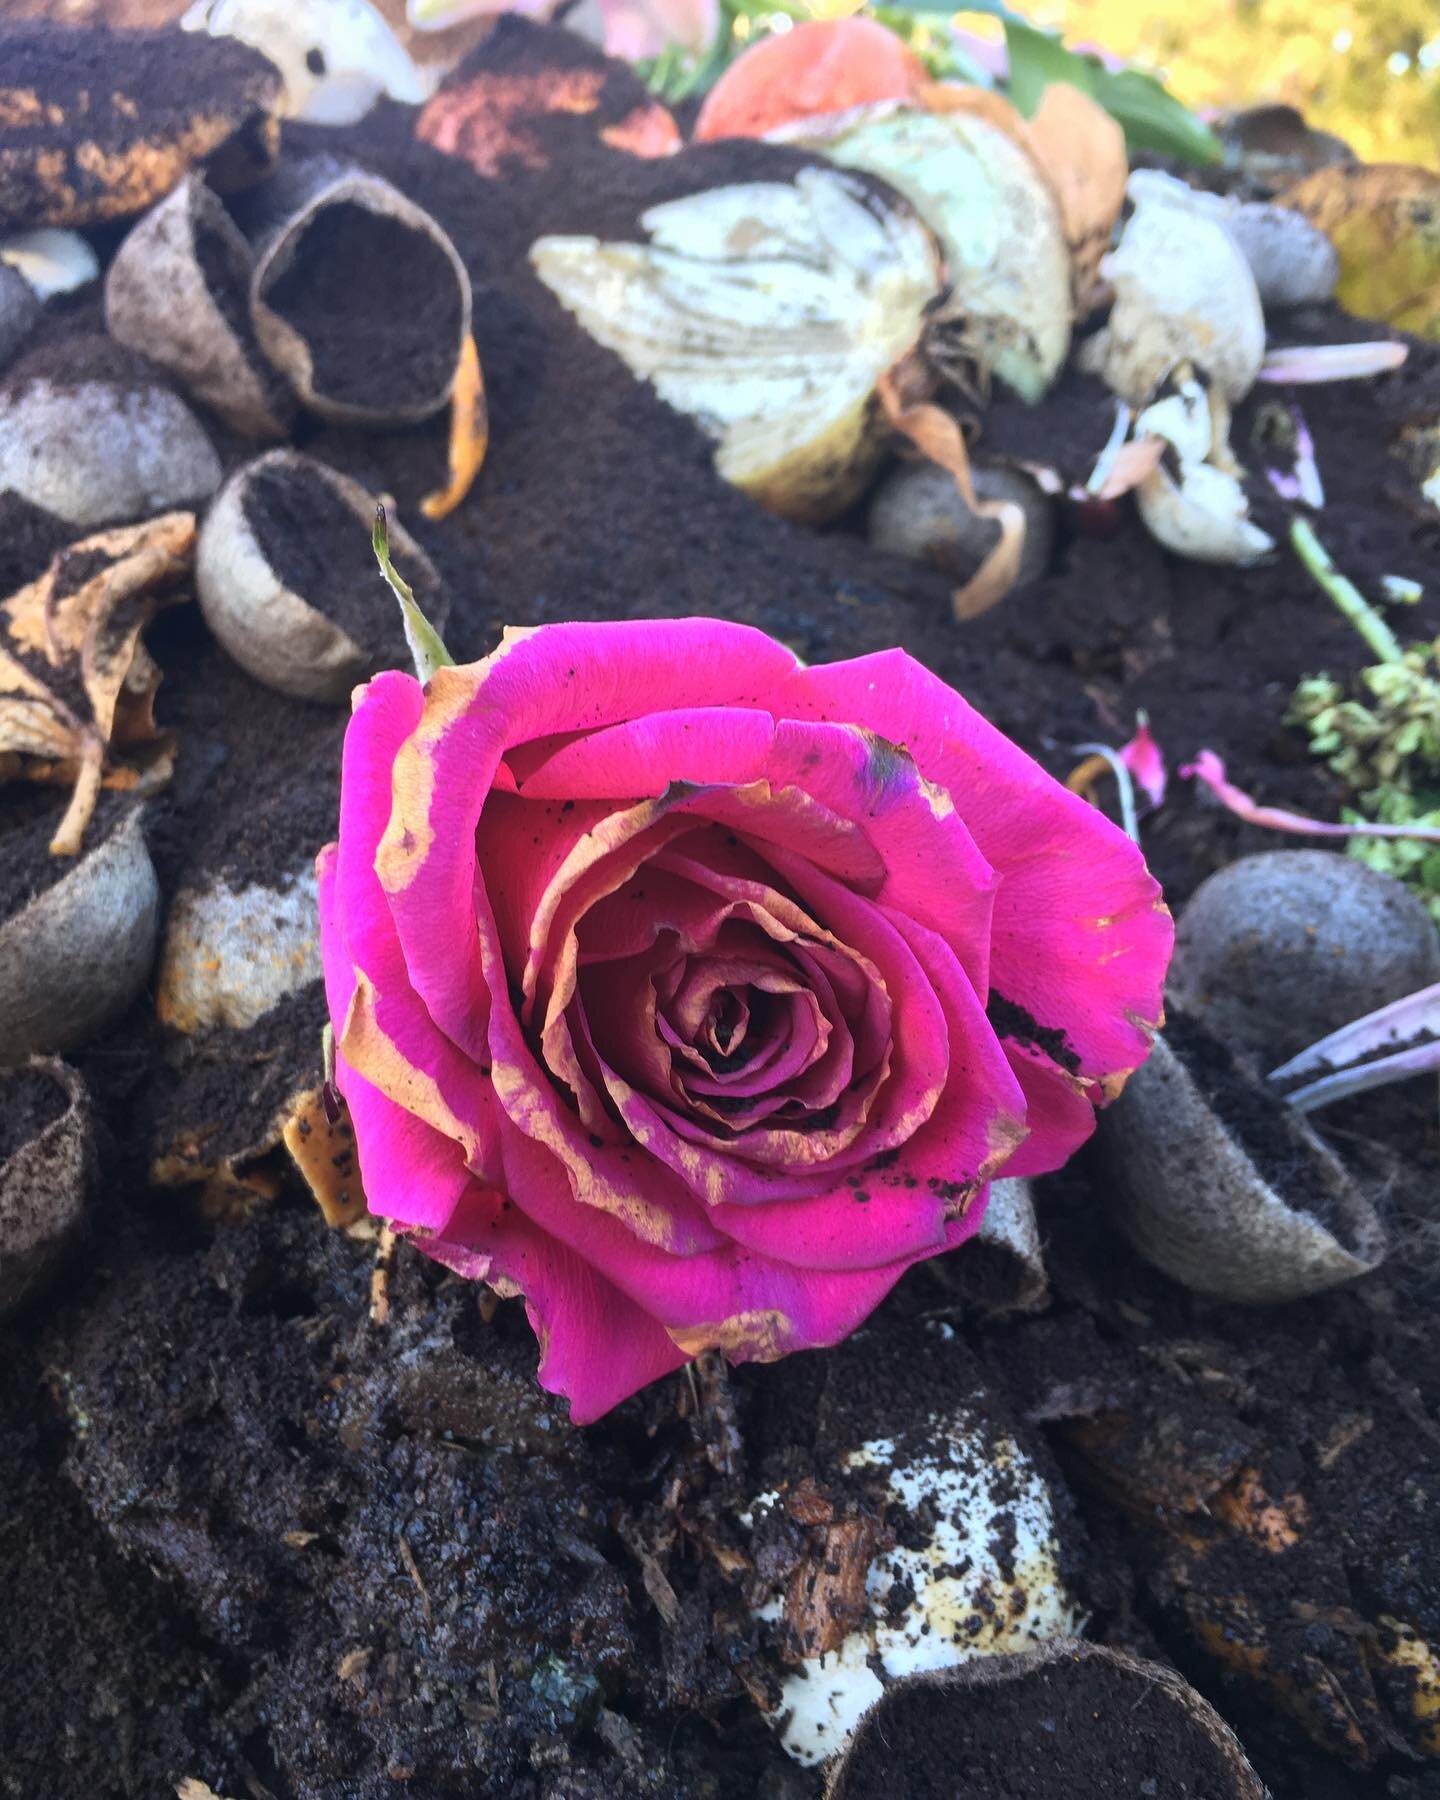 Roses are red
The sky is blue
Compost is sweet
And helps save the Earth, too
🌎💚🌱

Ps., toss your flowers in your bin once they&rsquo;re ready. 🌹

#compost #composting #konacompost #happyvalentinesday #lovetheearth #flowers #flowersofinstagram #ec